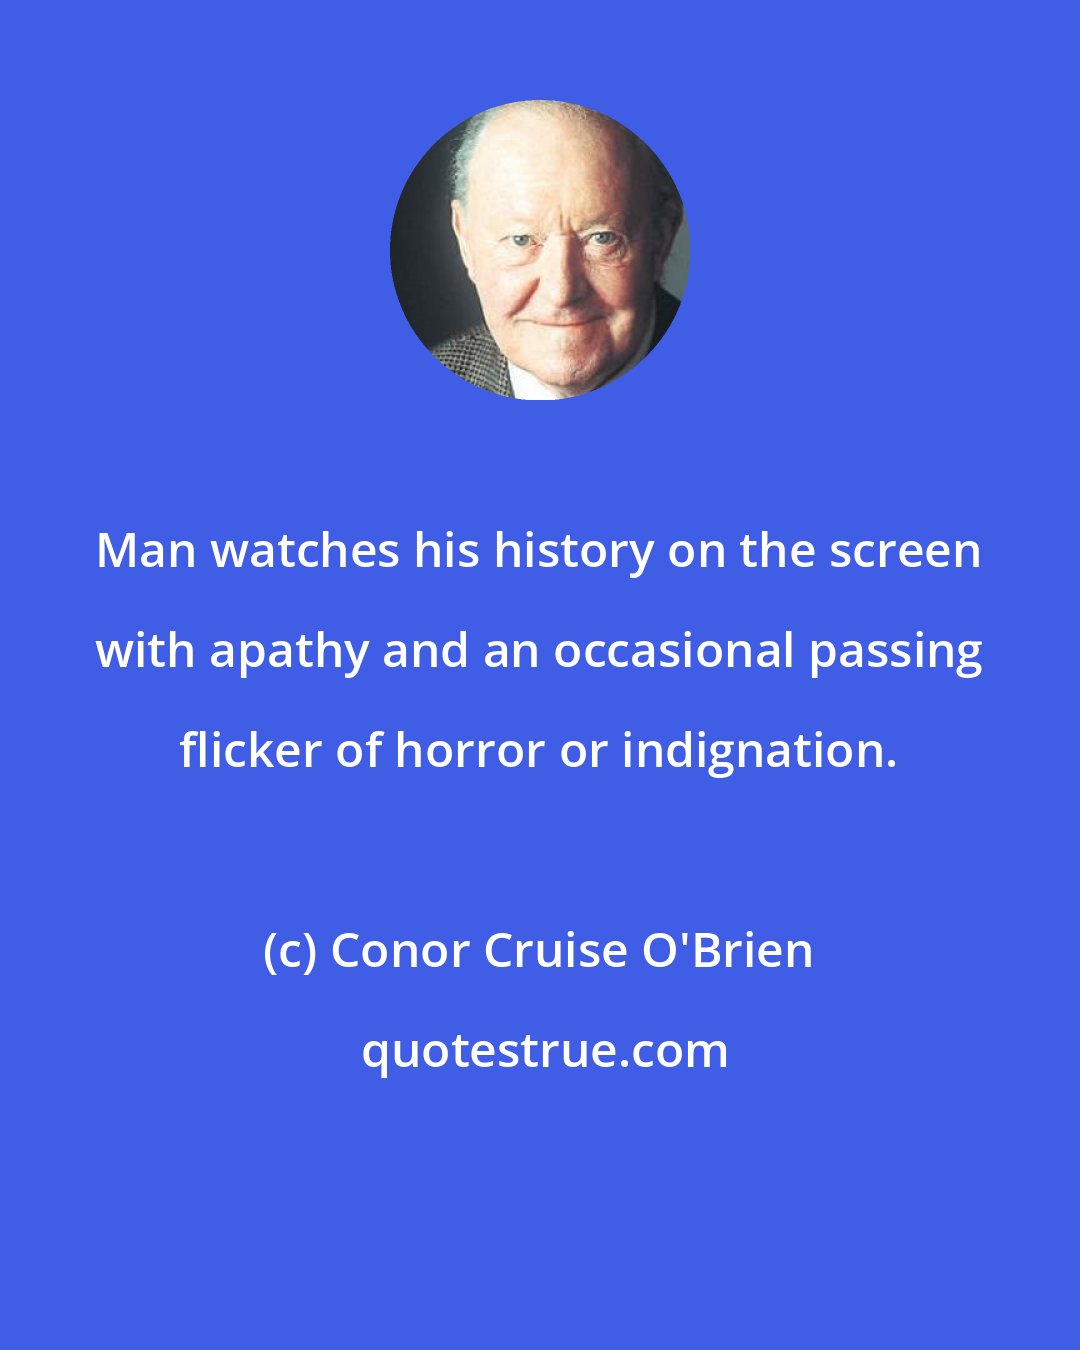 Conor Cruise O'Brien: Man watches his history on the screen with apathy and an occasional passing flicker of horror or indignation.